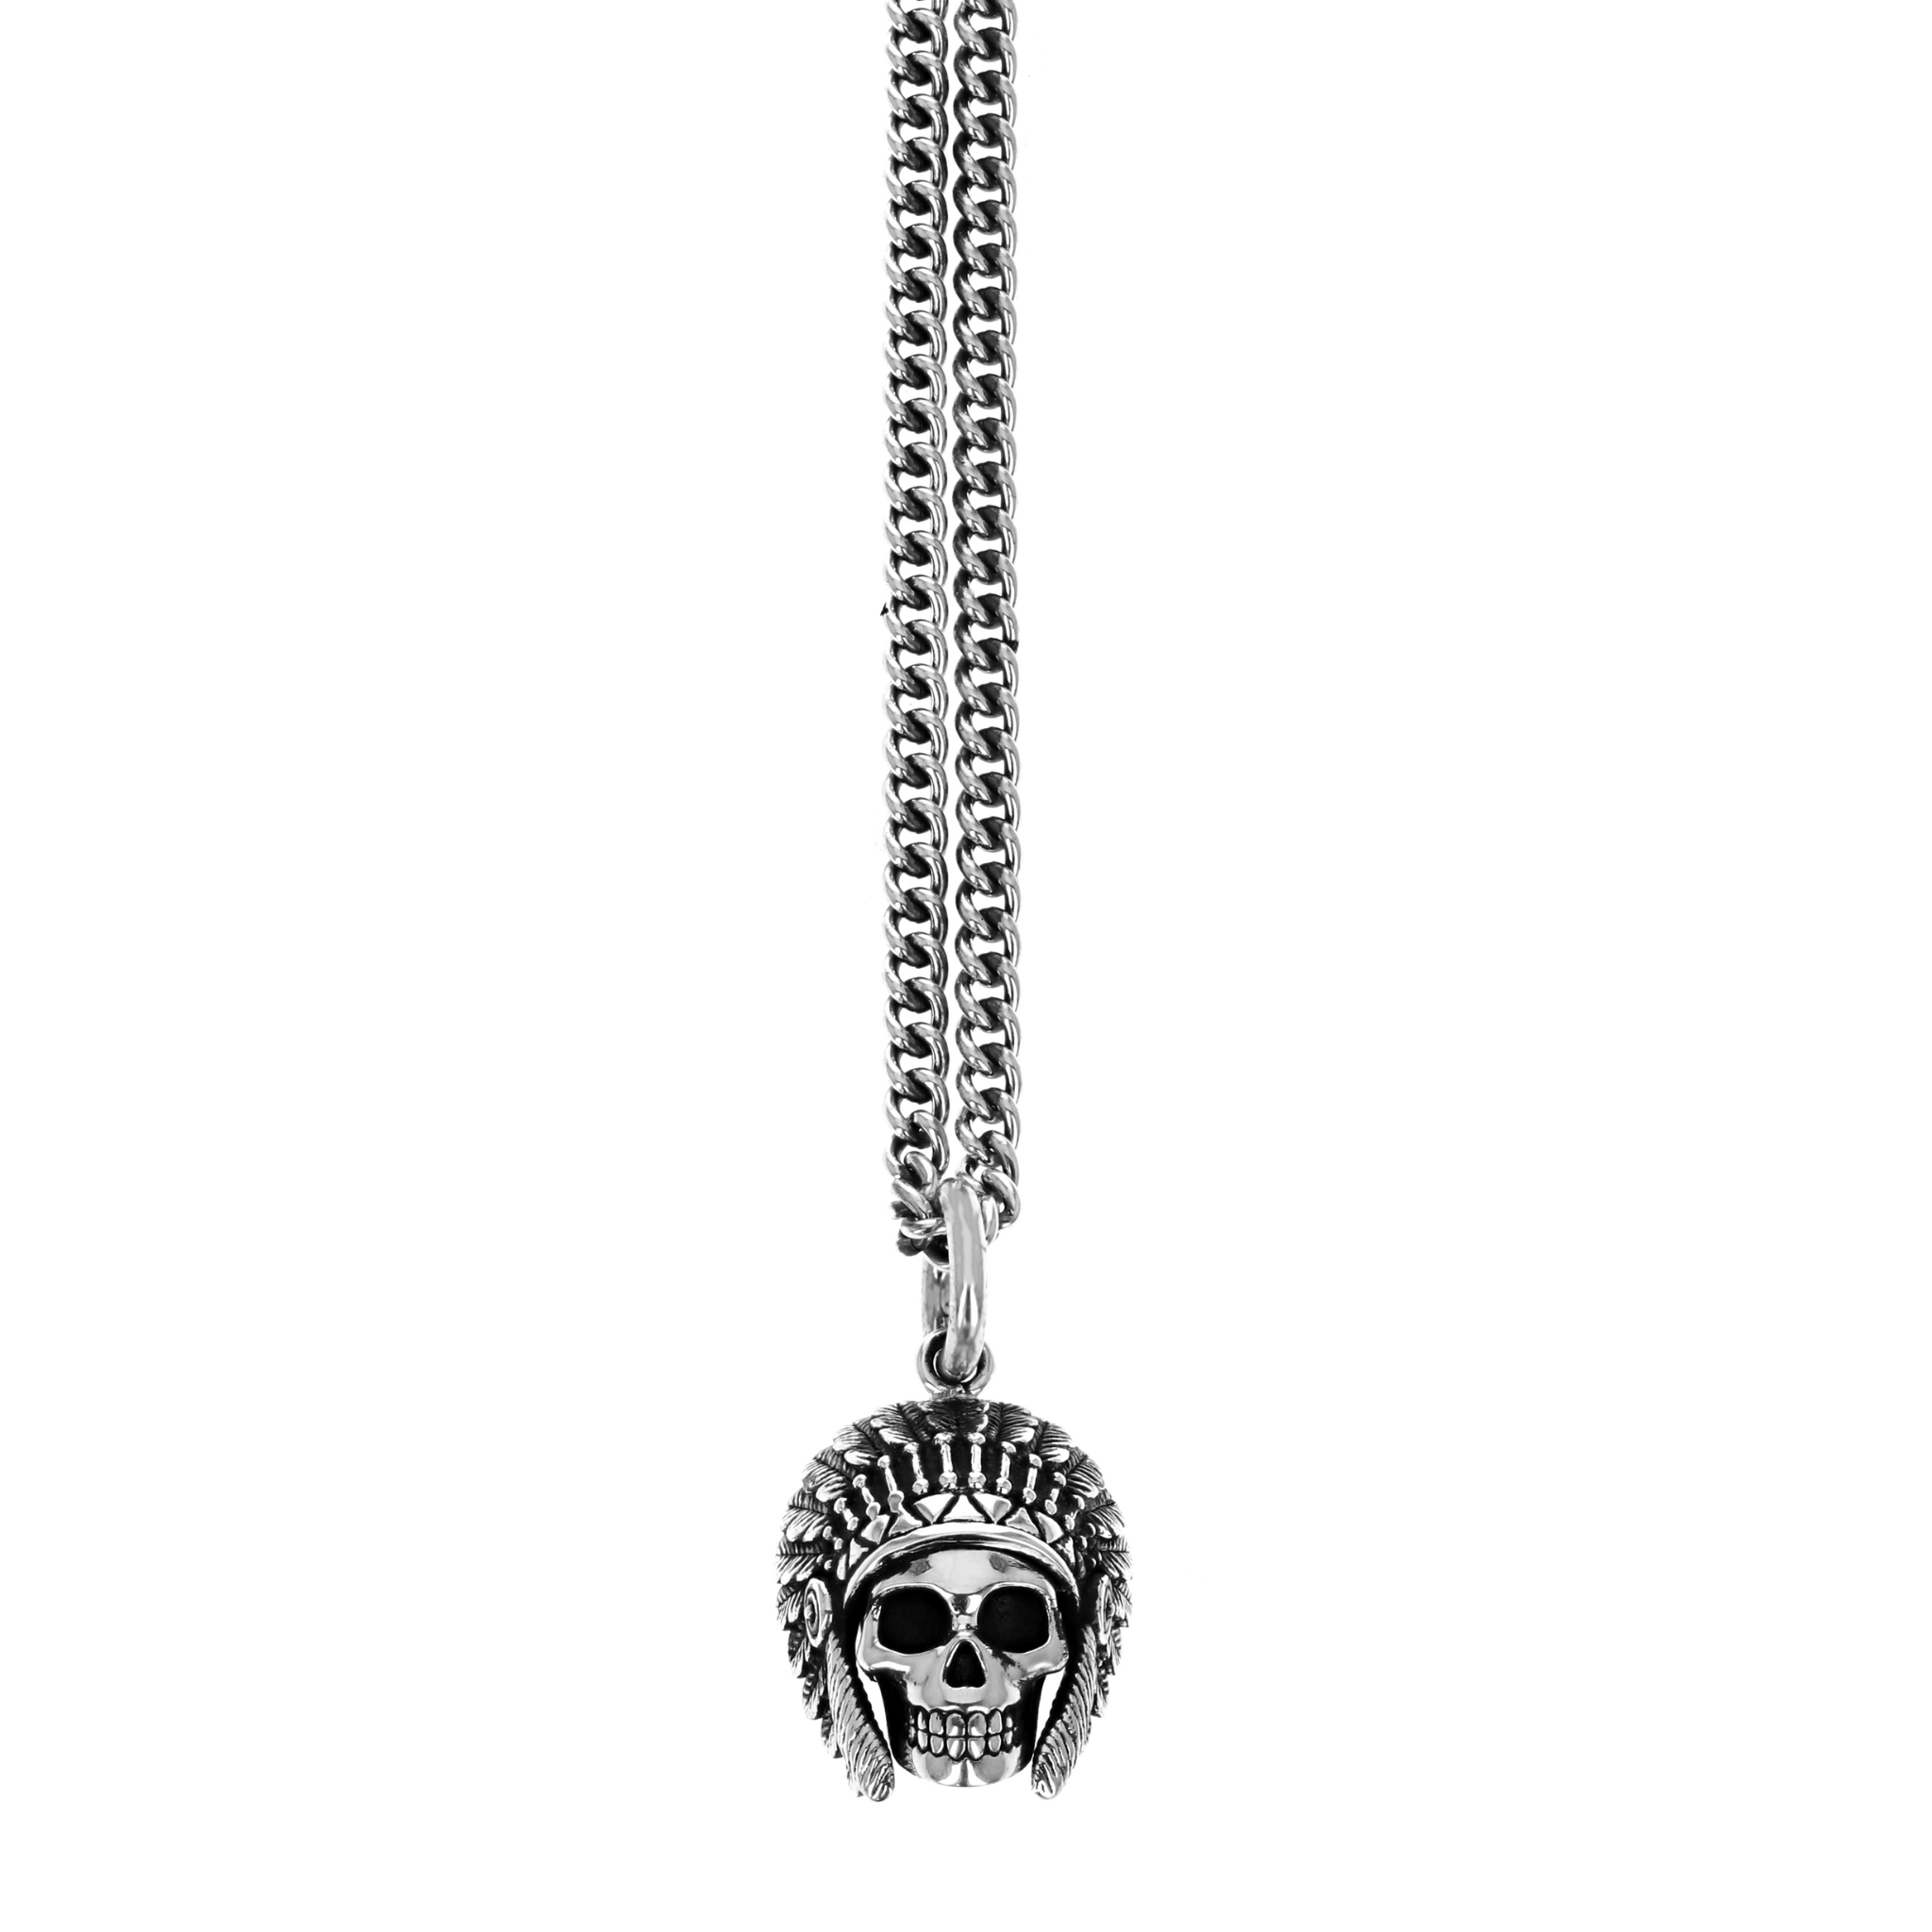 Product shot of skull pendant with feather headress on